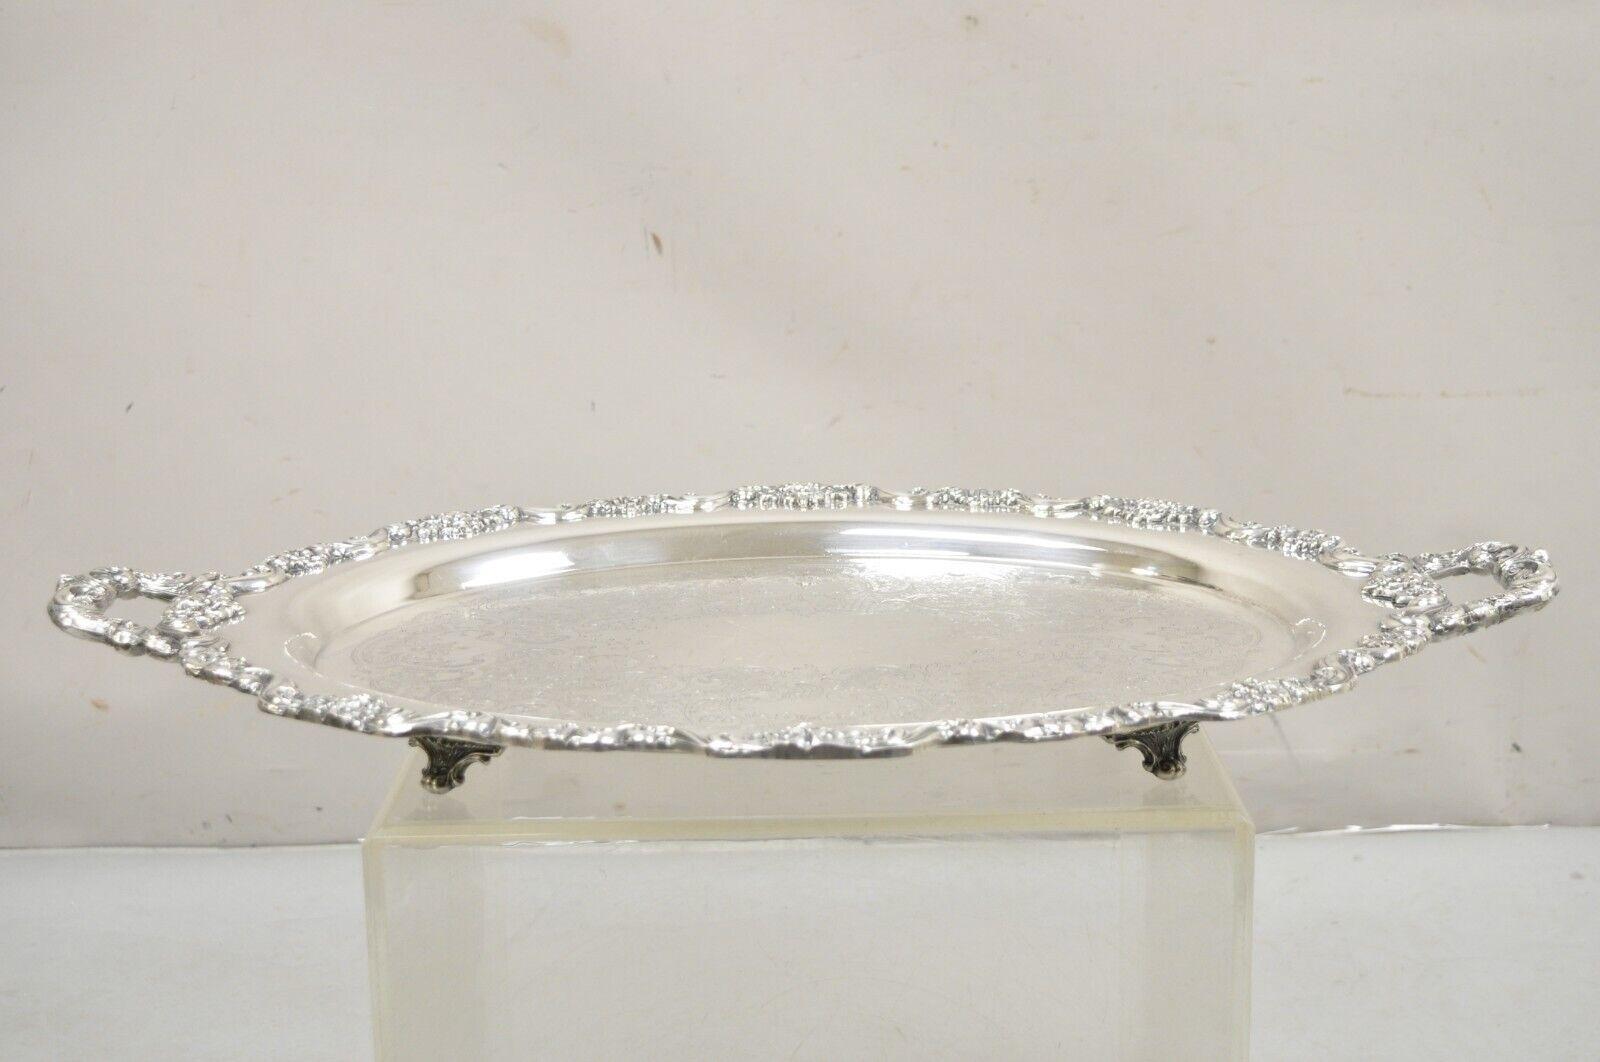 Vintage Towle 6955 Large Silver Plated Oval Victorian Serving Platter Tray In Good Condition For Sale In Philadelphia, PA